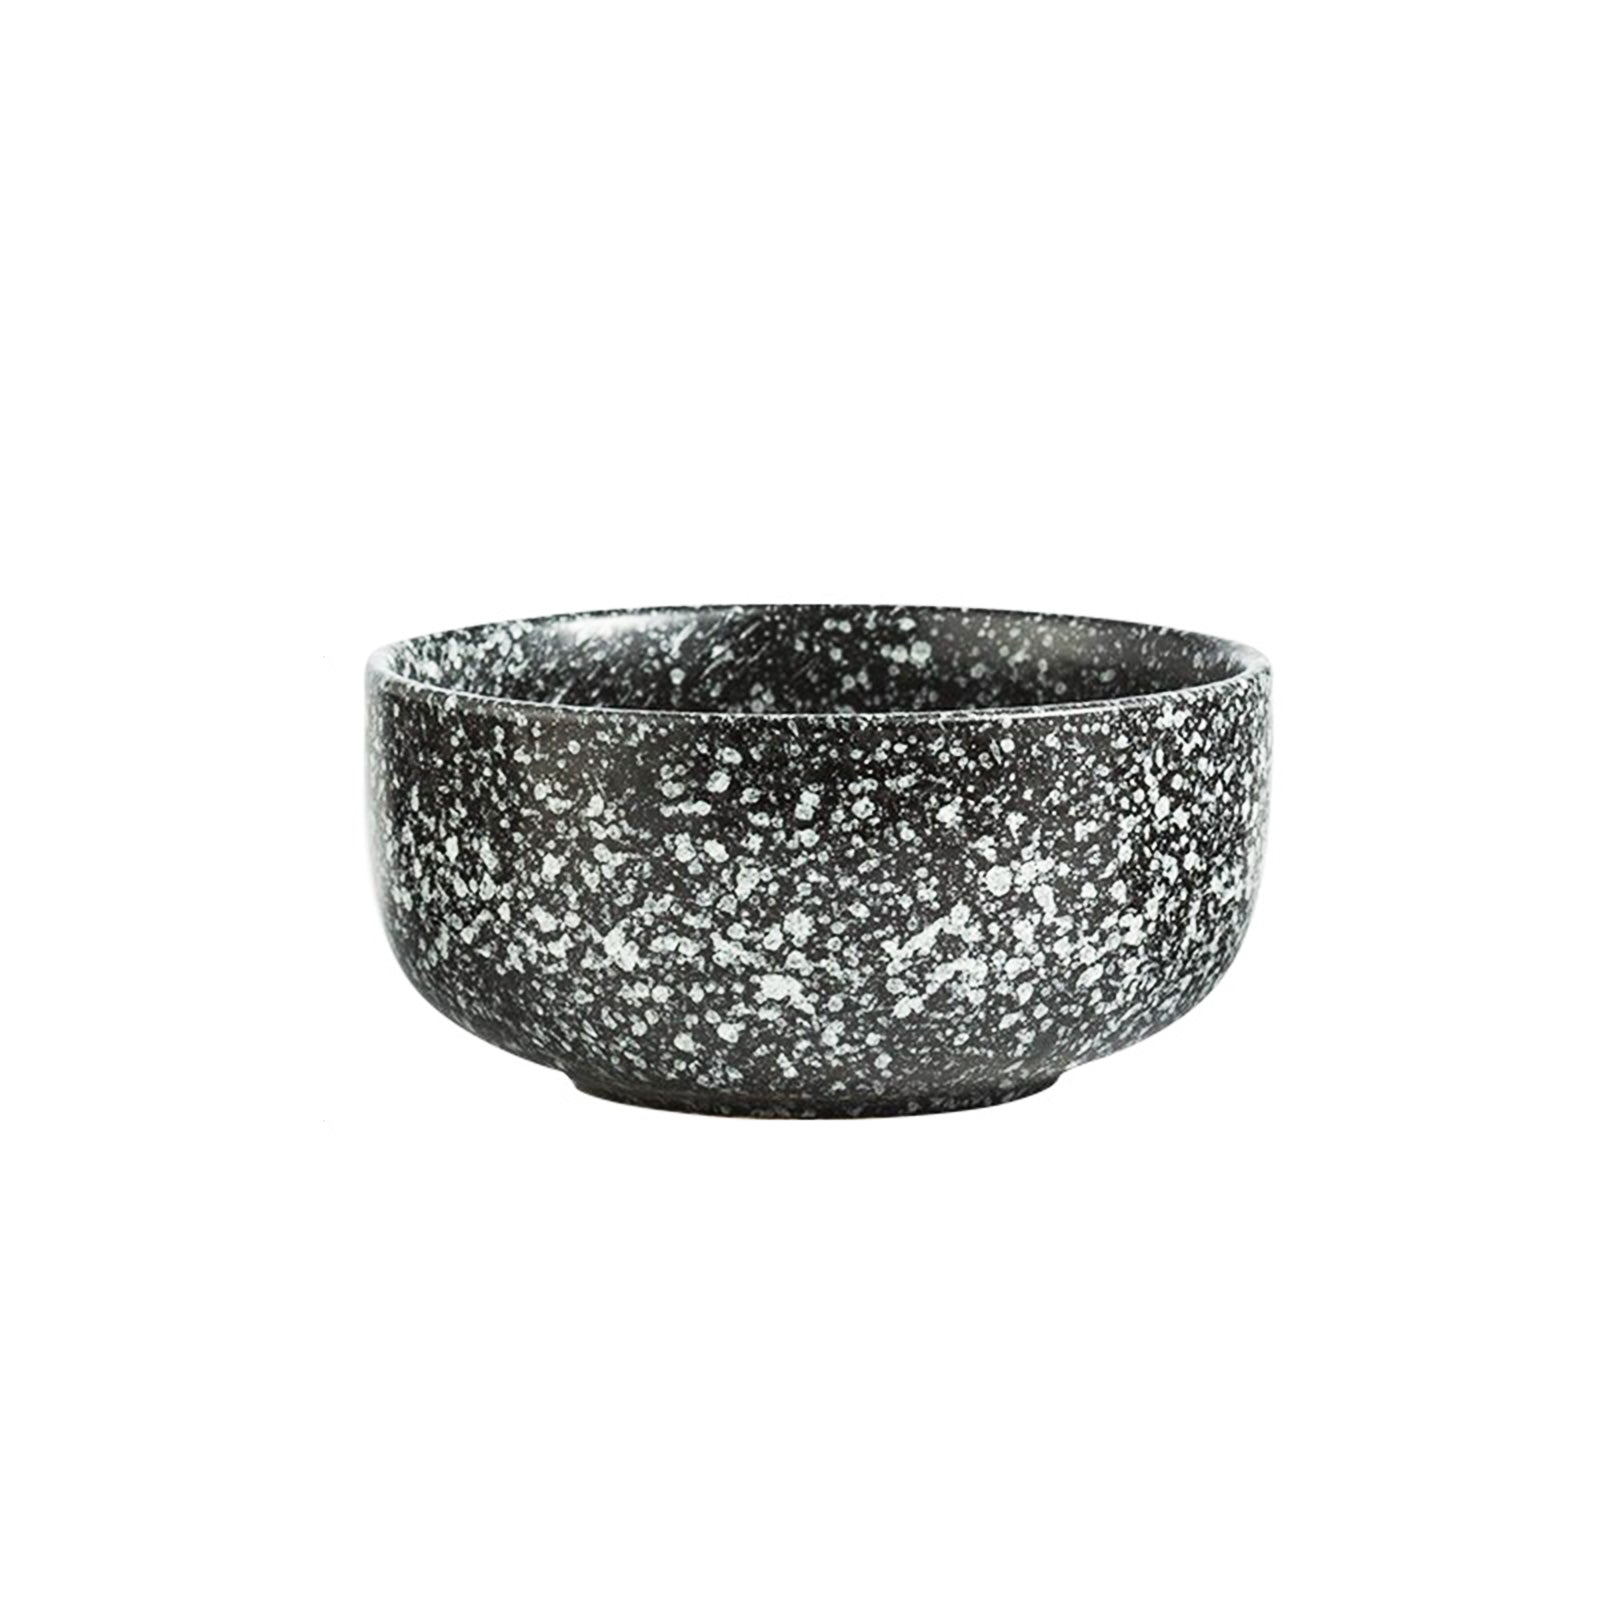 Japanese-Inspired Pigmented Noodle Bowls - Choose from 6 Styles and 2 Sizes